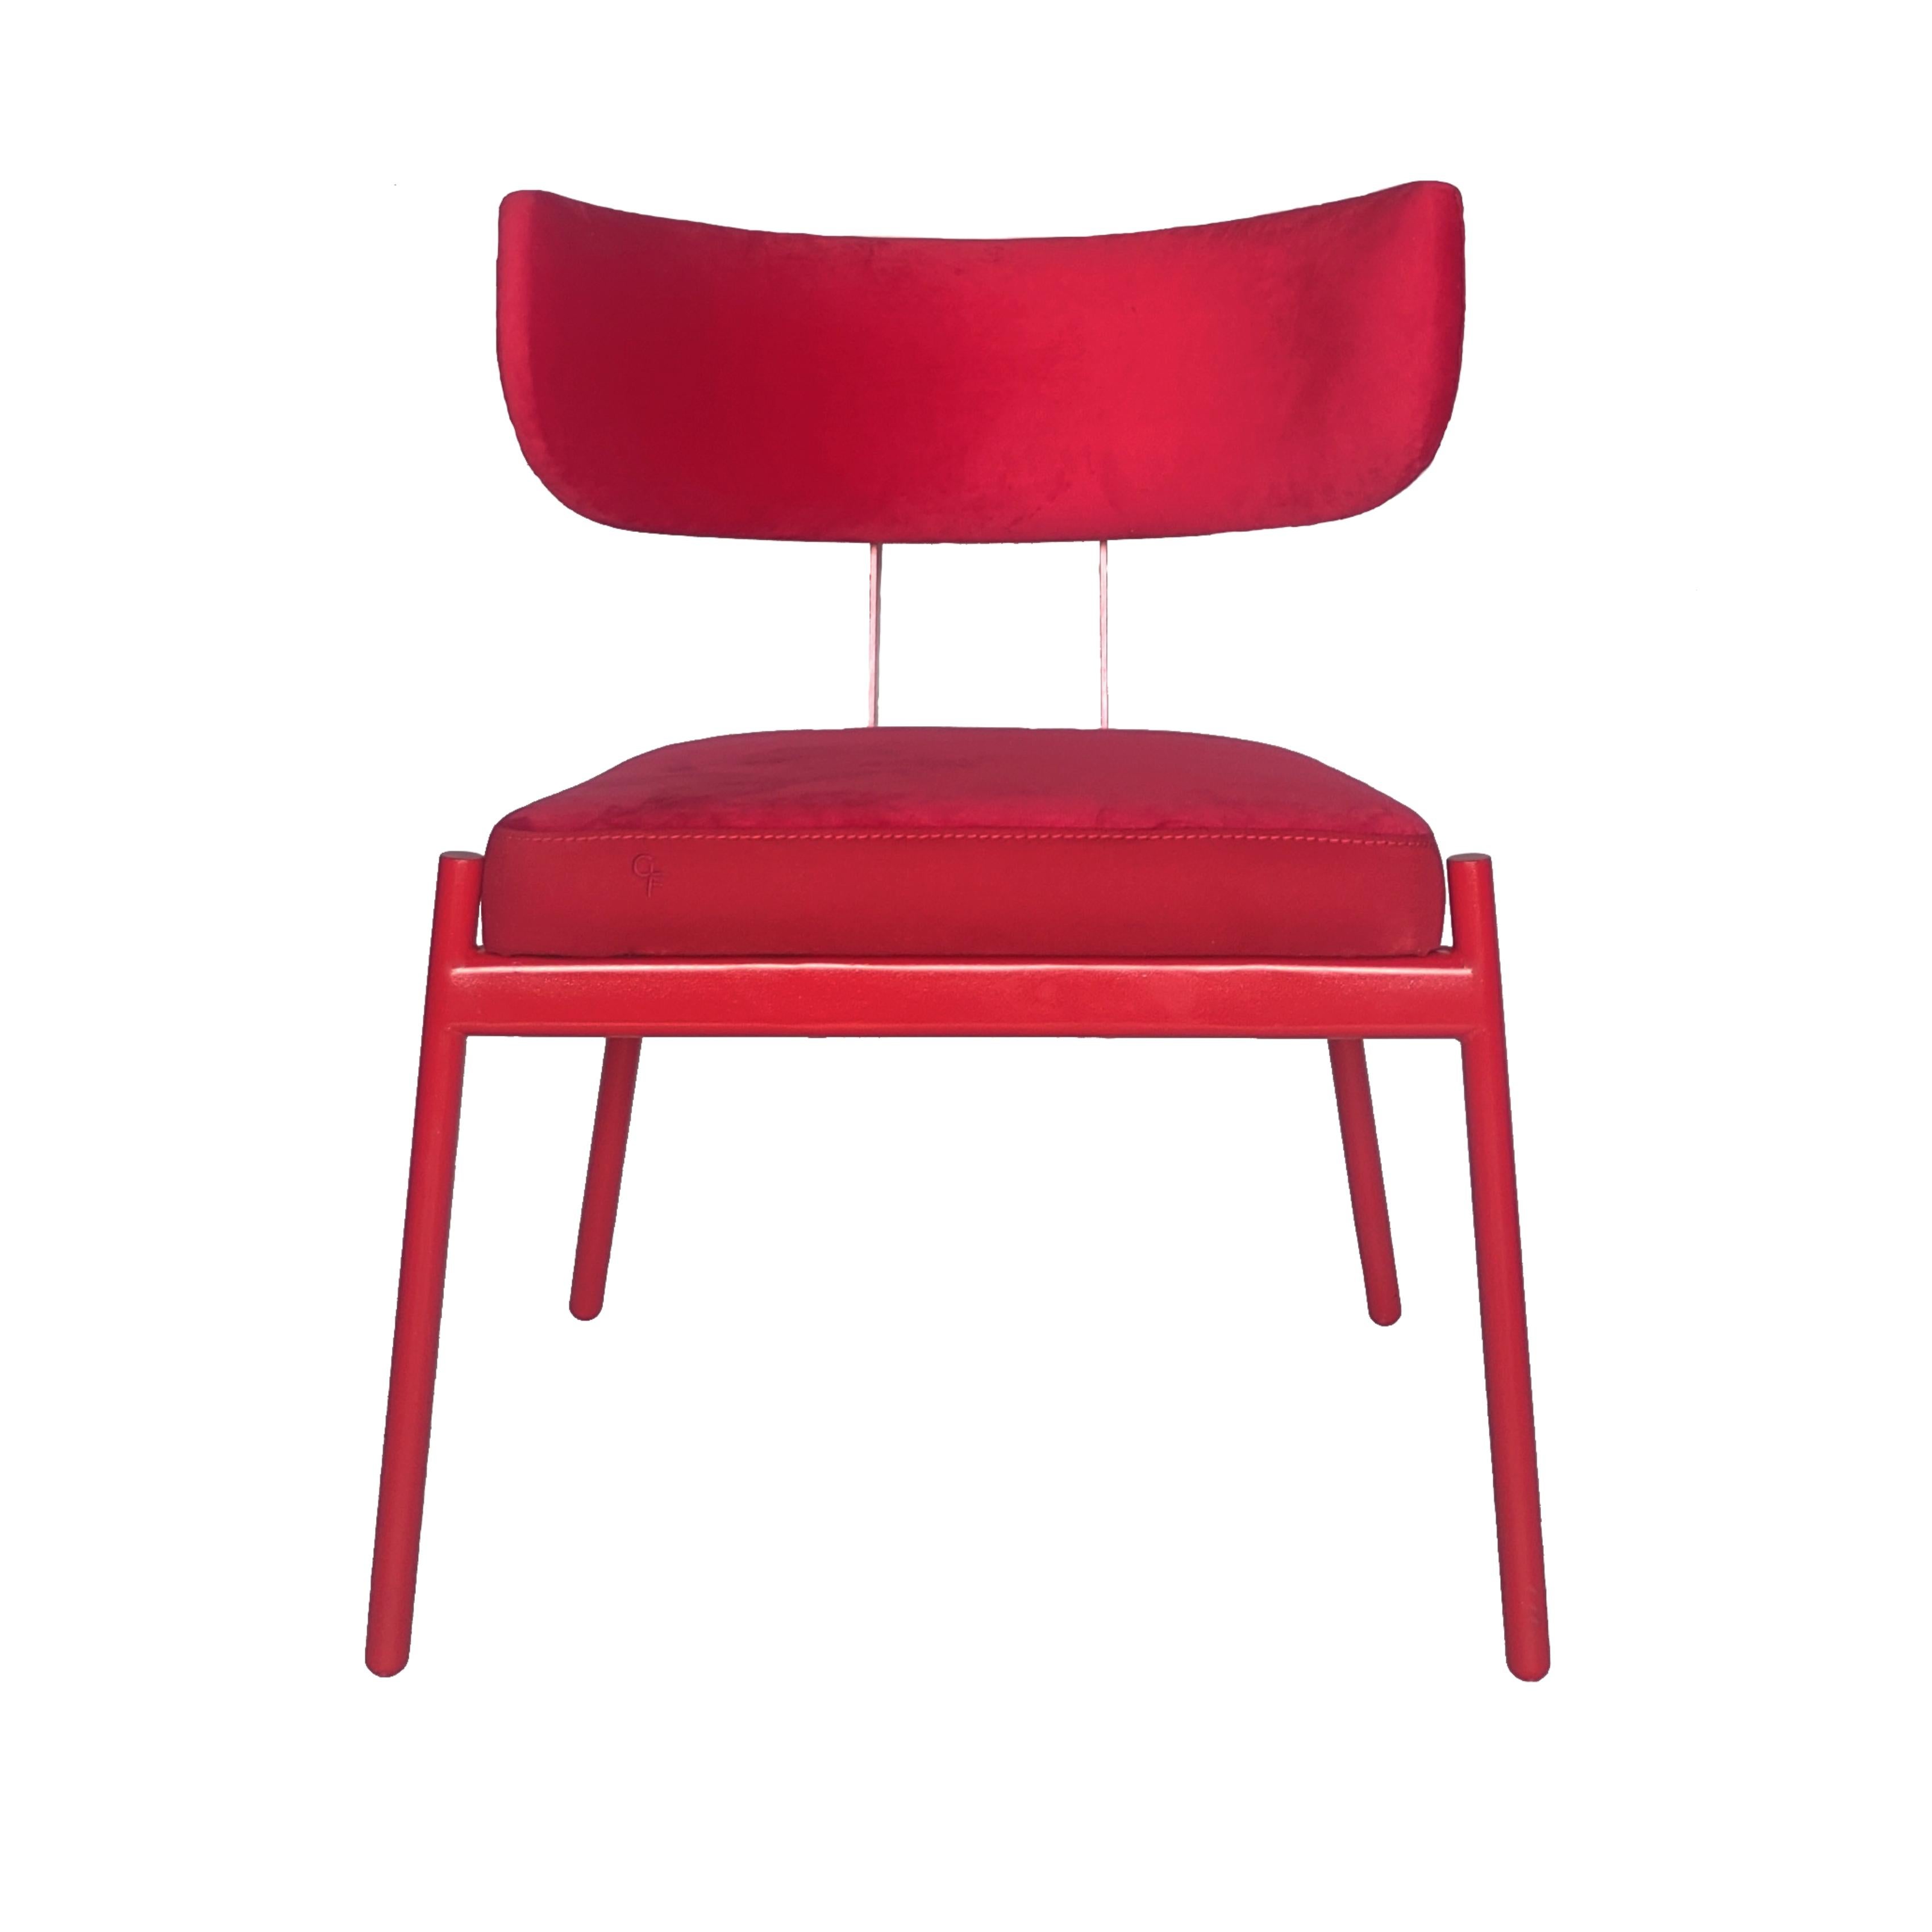 Red Love chair by Gabriel Freitas In New Condition For Sale In São Paulo, SP